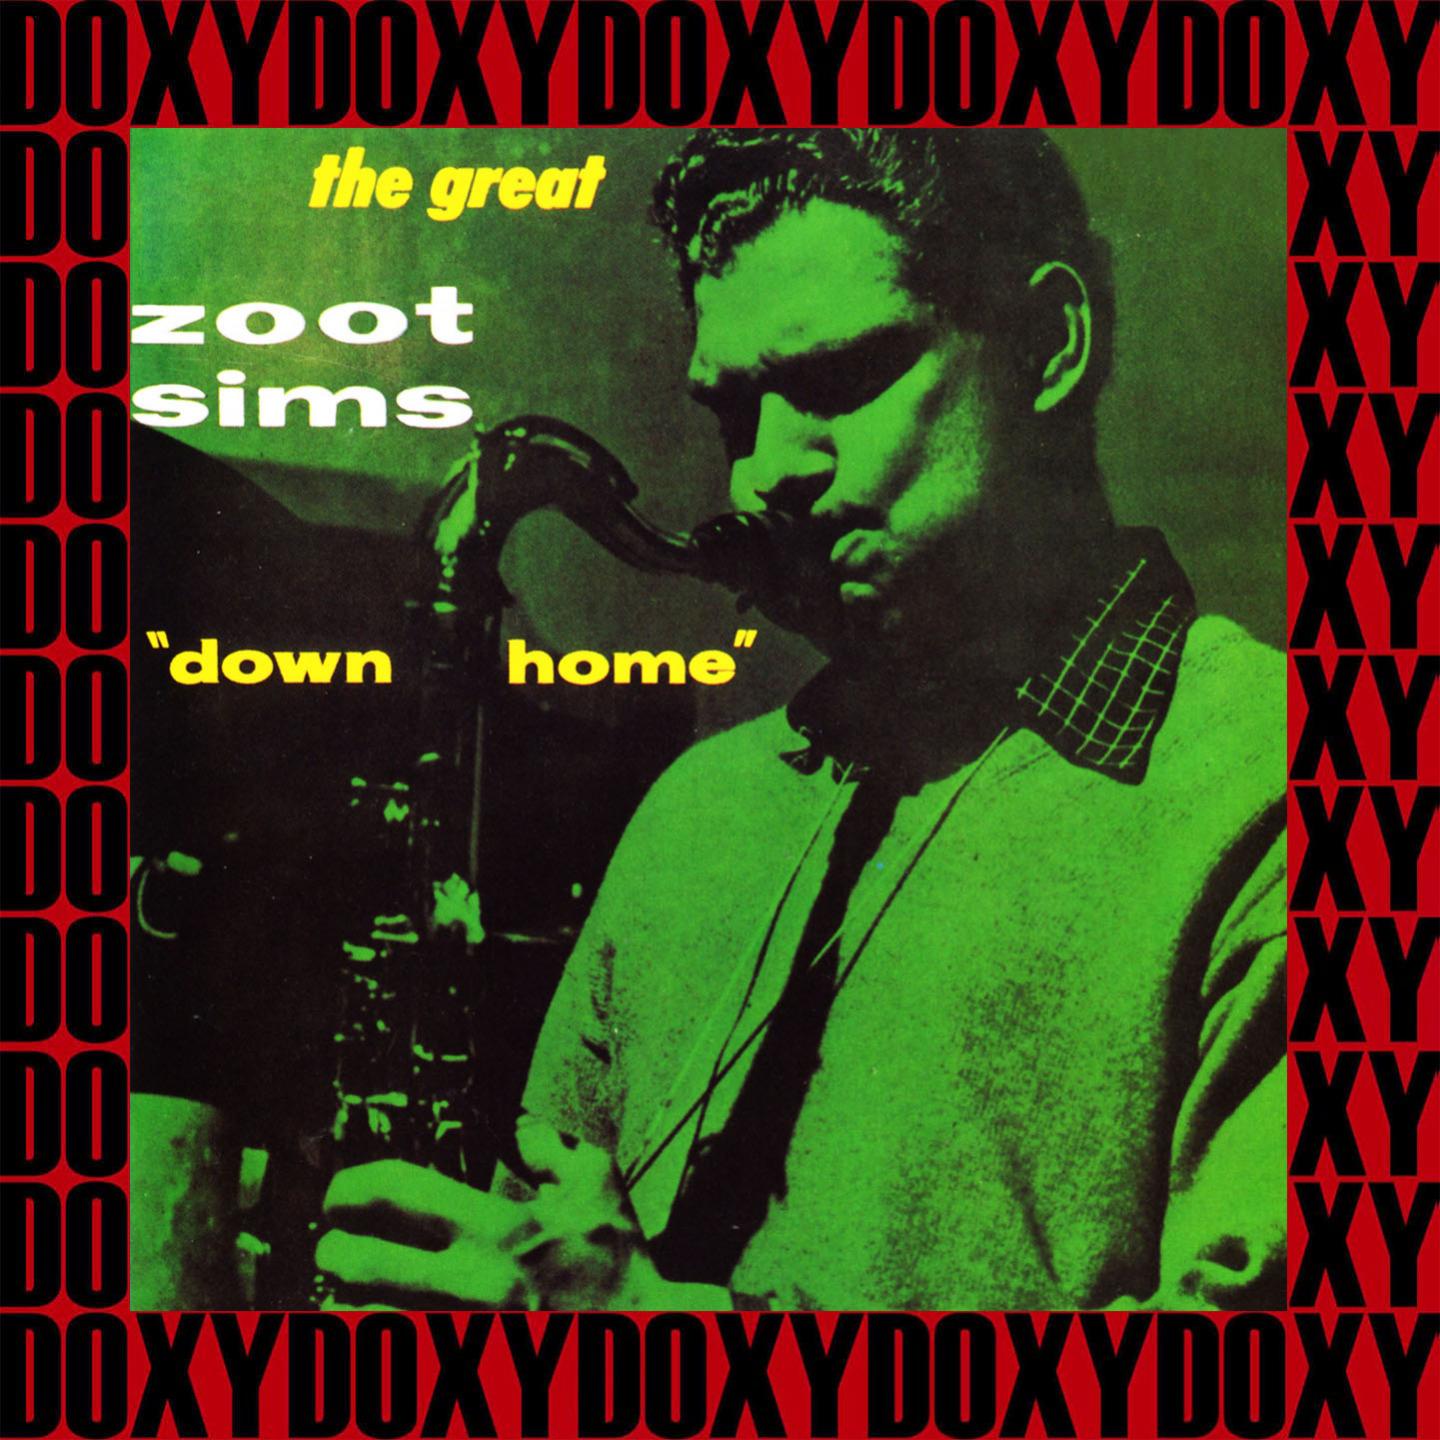 Down Home, The Complete Sessions (Remastered Version) (Doxy Collection)